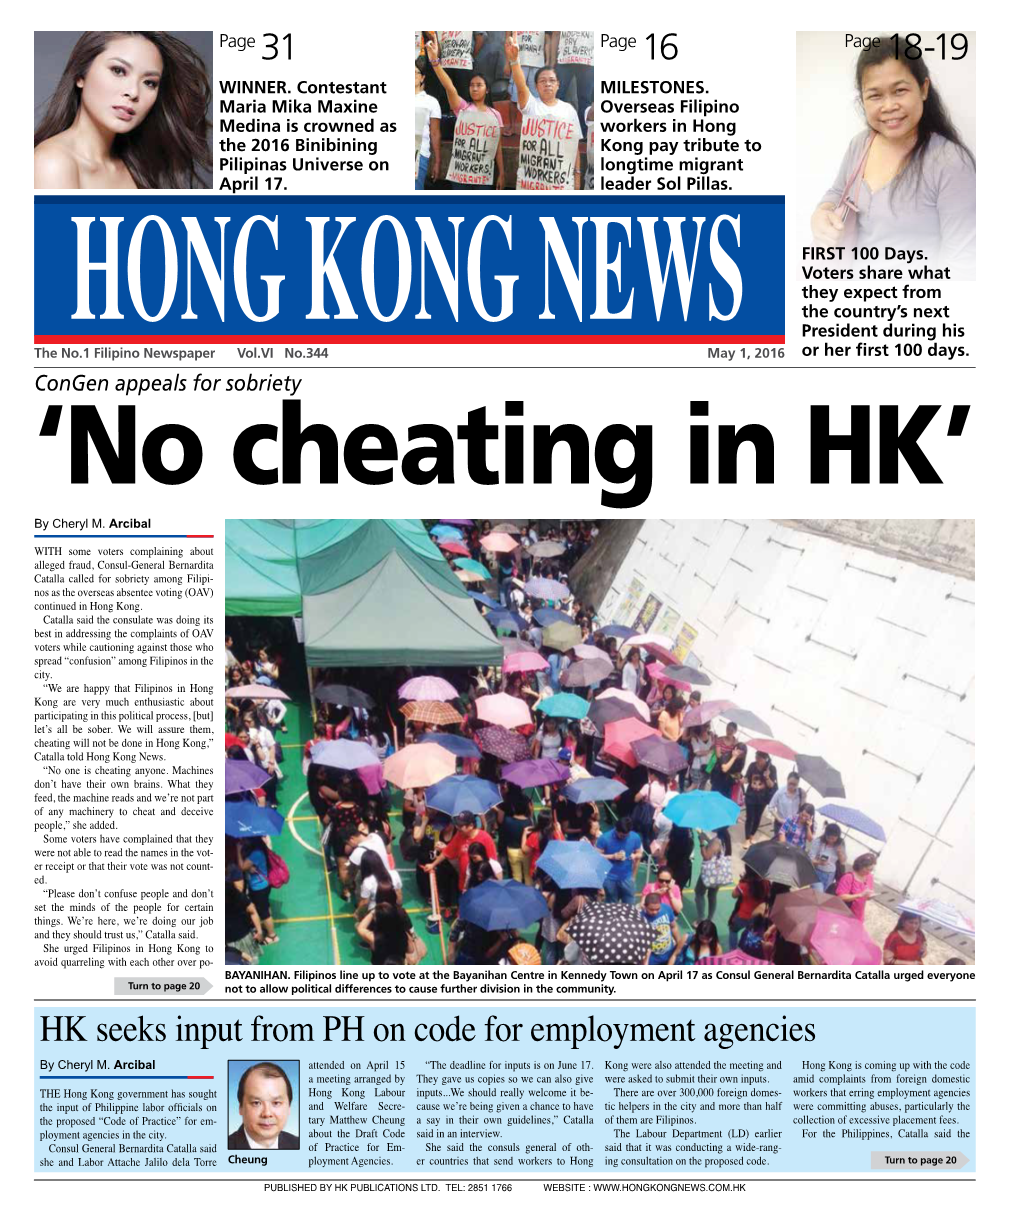 HK Seeks Input from PH on Code for Employment Agencies by Cheryl M